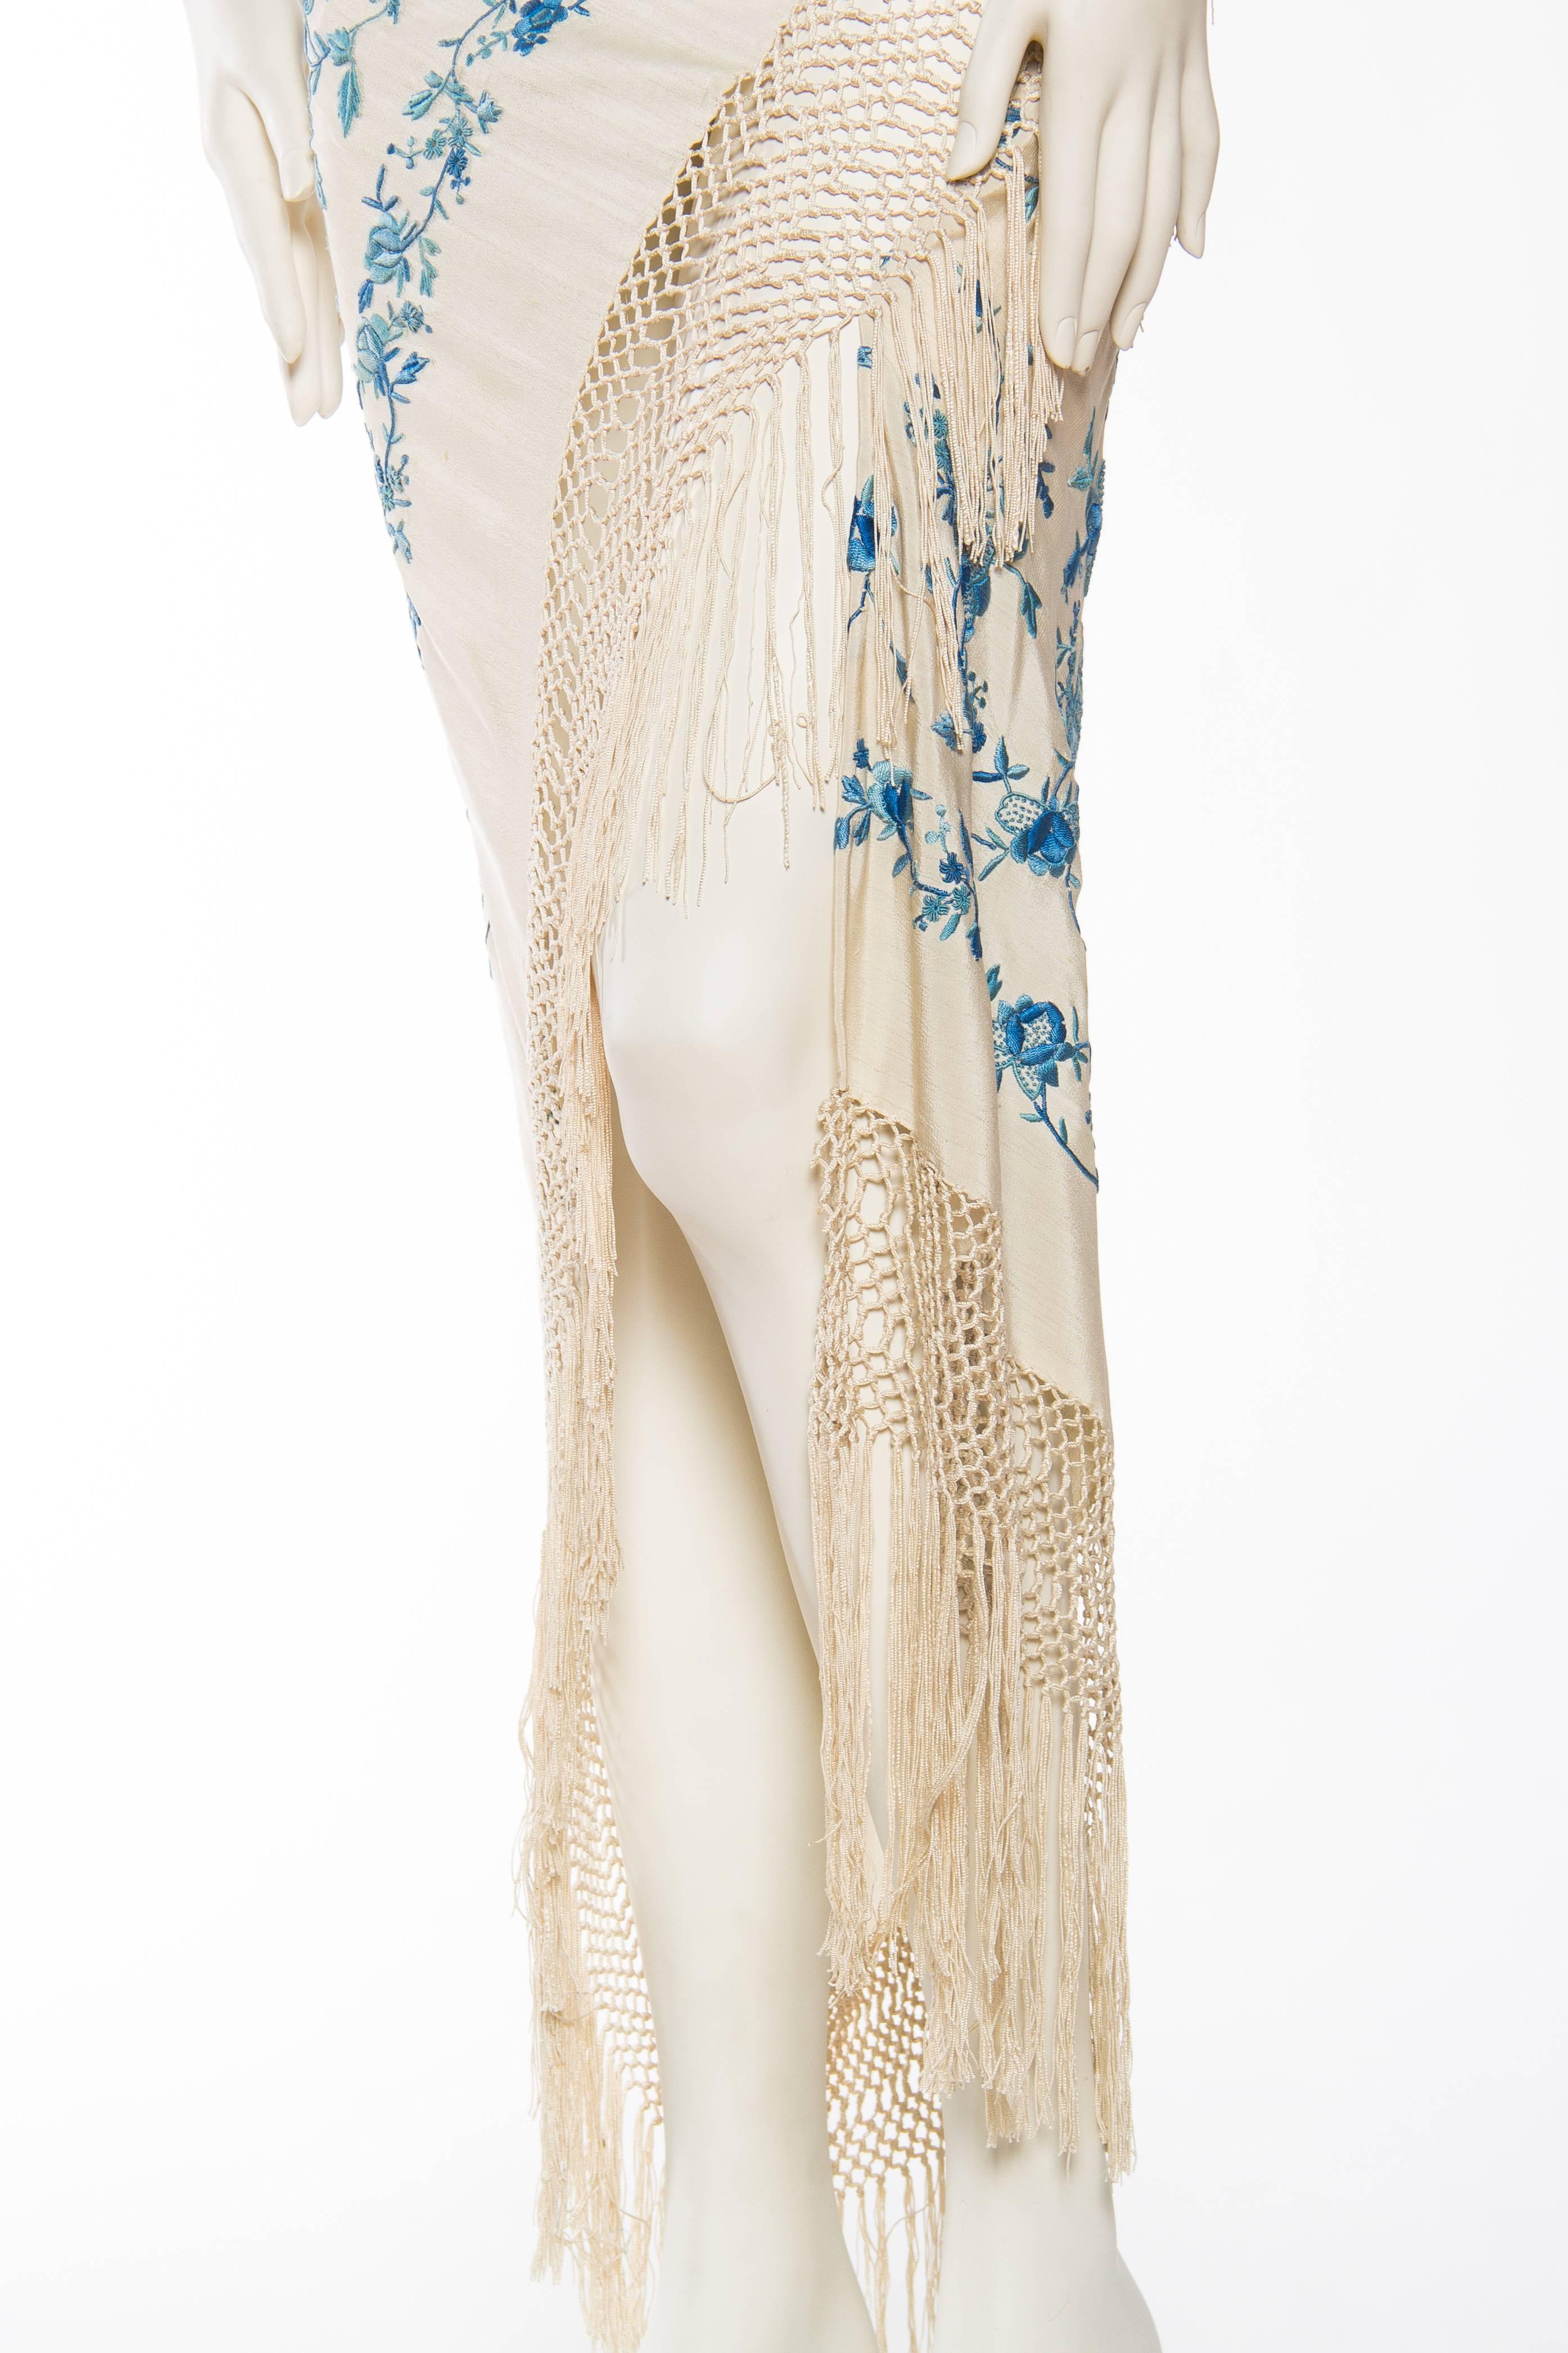 Bias Draped Fringe Shawl Dress in the style of Galliano and McQueen 2